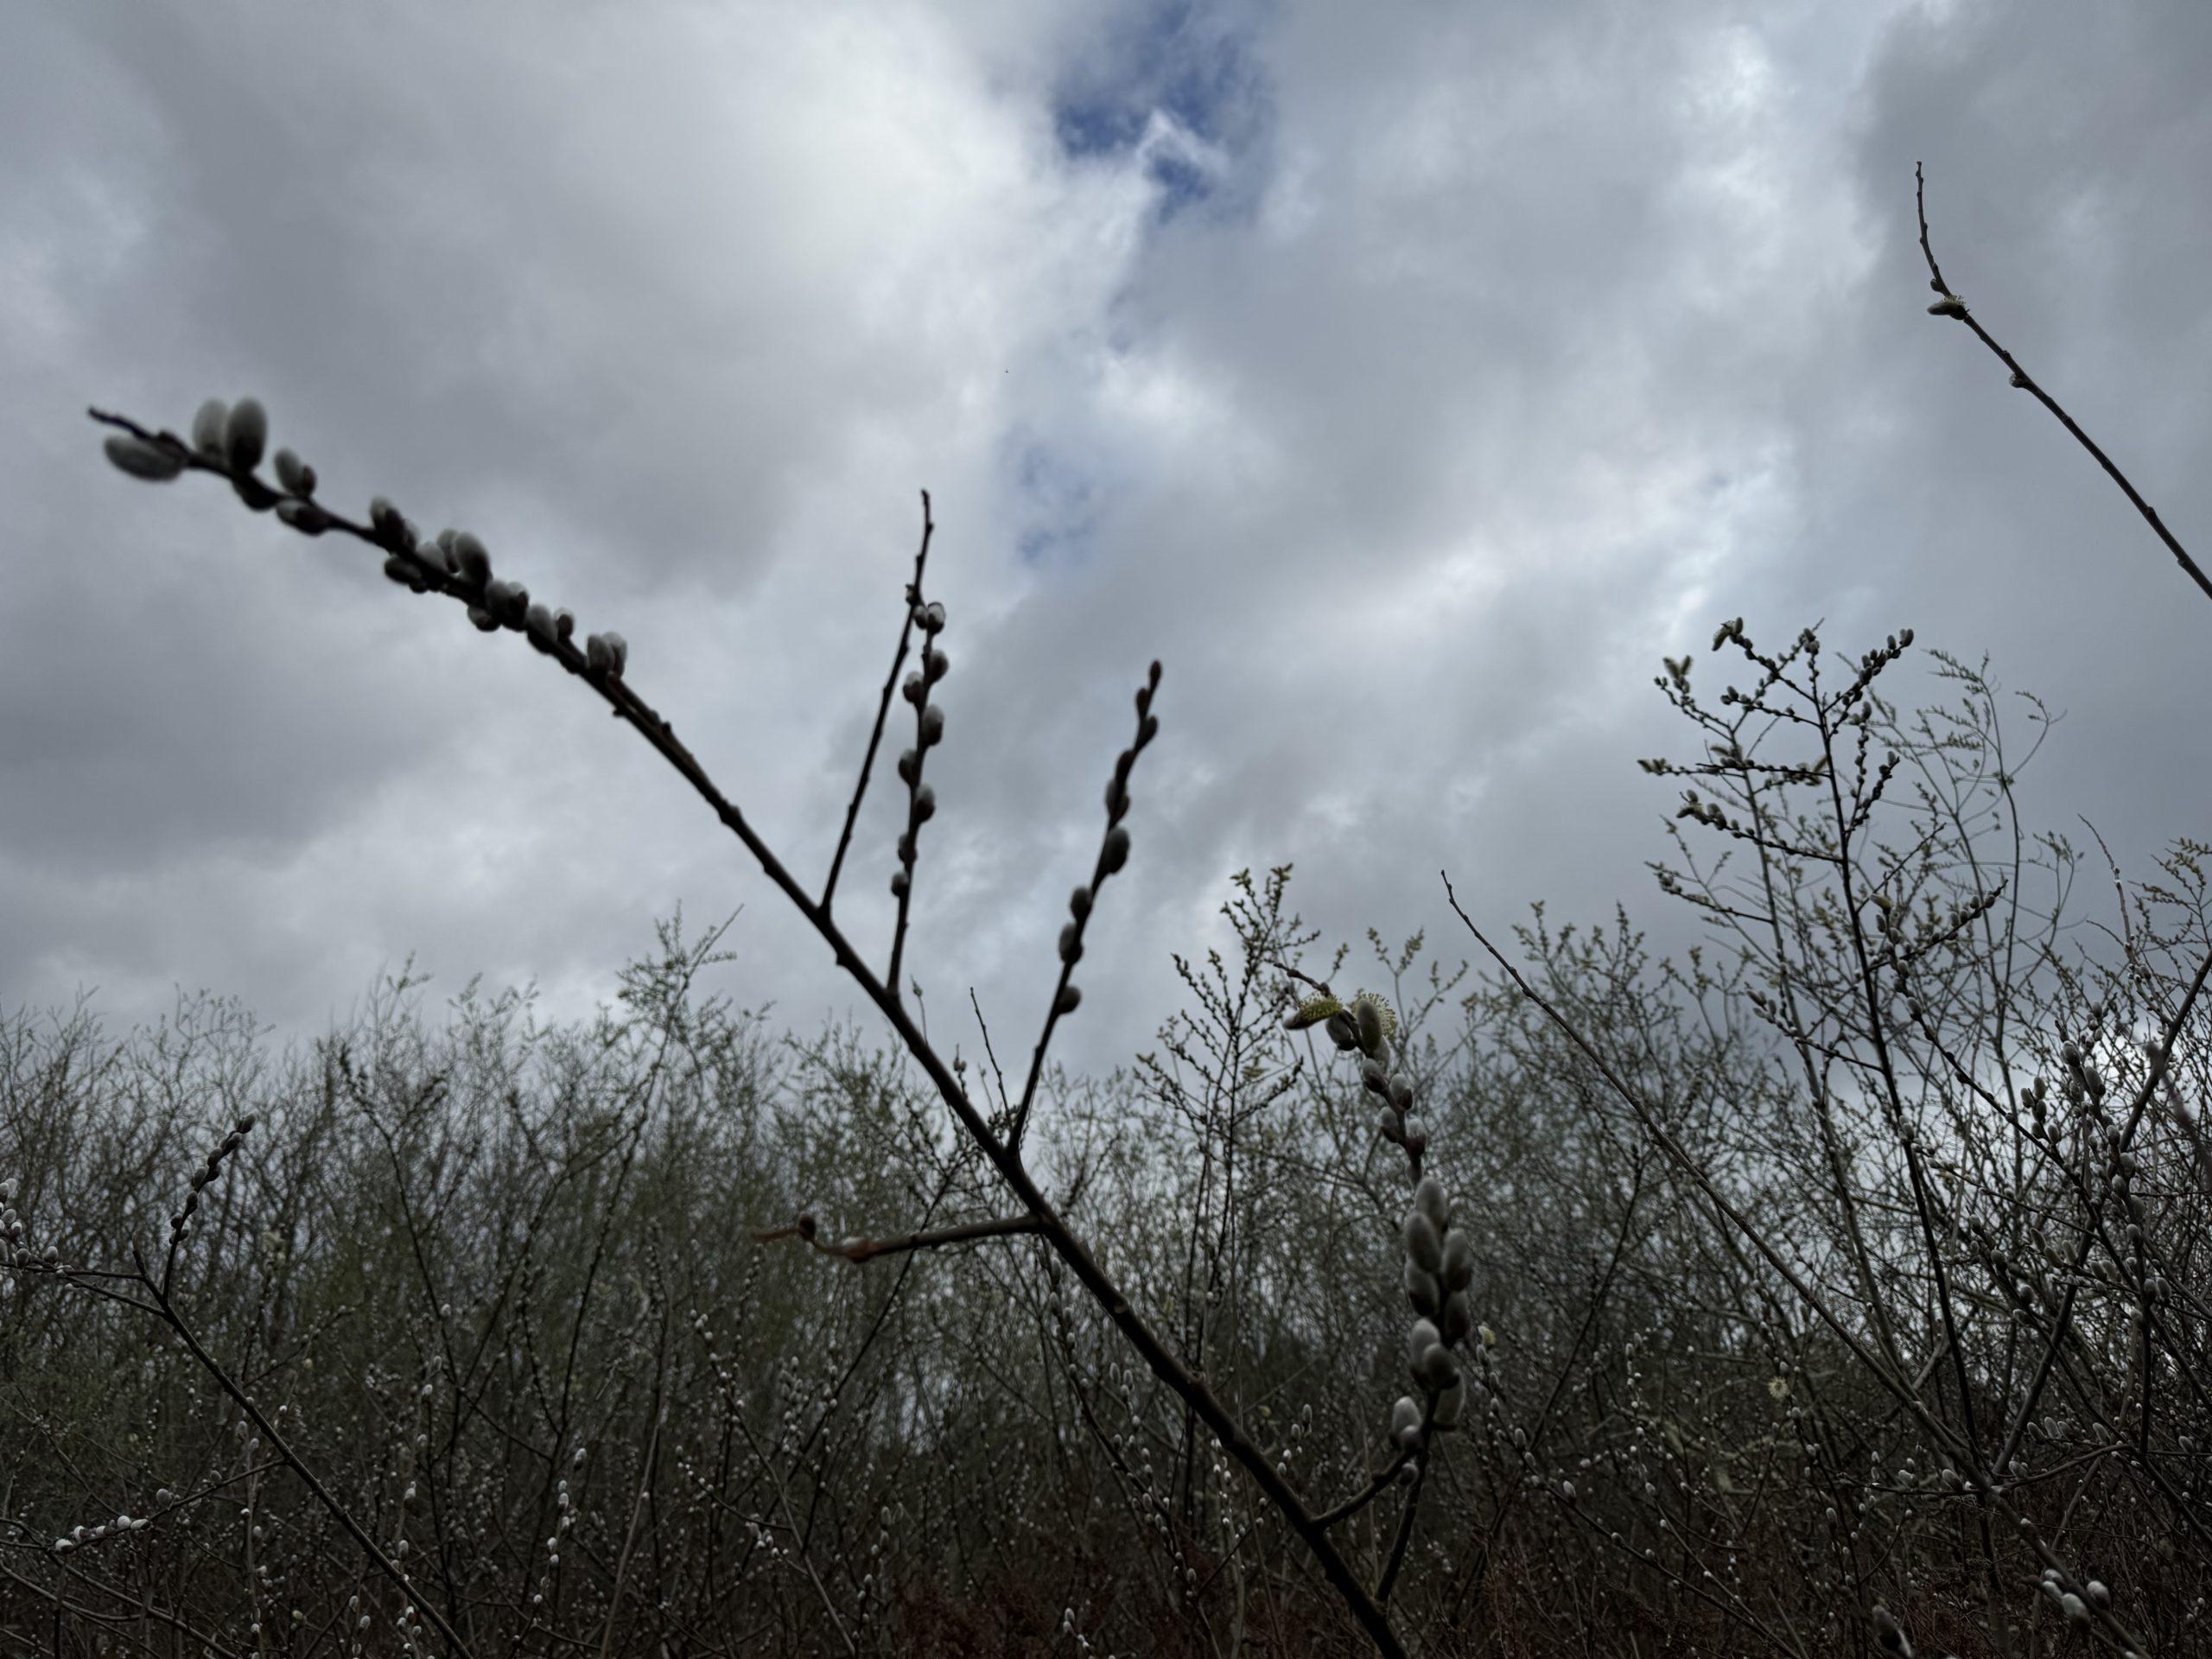 Just-budding pussywillows on a branch, shot from below so they're set against dramatic clouds in the sky.